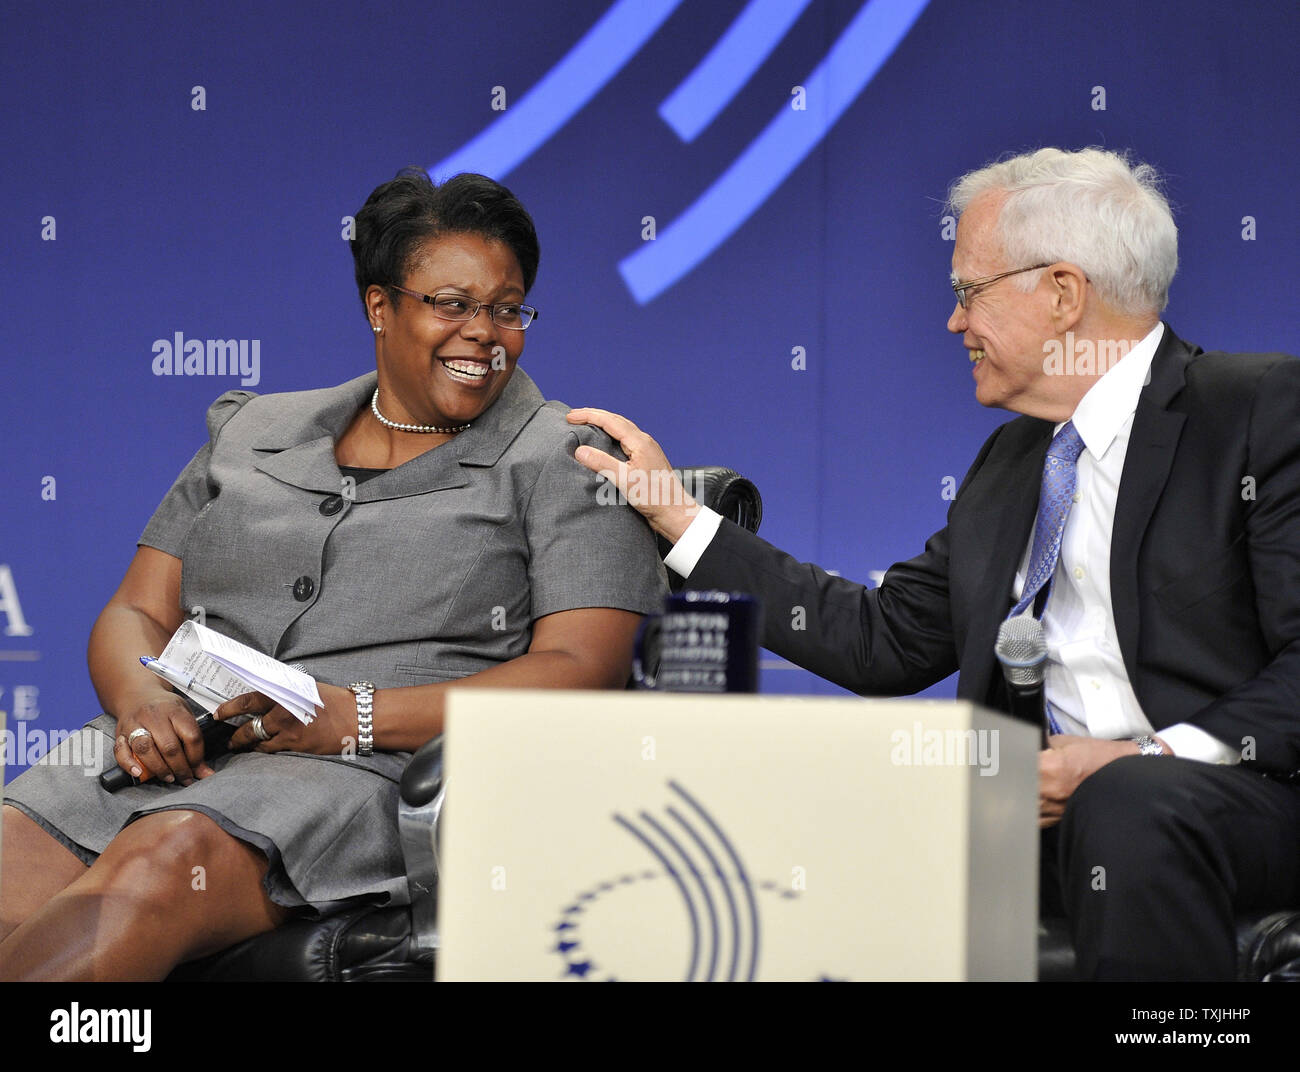 Nobel prize-winning, University of Chicago Economics professor James Heckman (R) and D.C. Public Schools Chancellor Kaya Henderson participate in a panel discussion on education in America at the CGI America meeting on June 29, 2011 in Chicago. More than 700 business, government and non-profit leaders are participating in the two-day meeting, which is the first Clinton Global Initiative event to focus exclusively on driving job creation and economic growth in the United States.     UPI/Brian Kersey Stock Photo